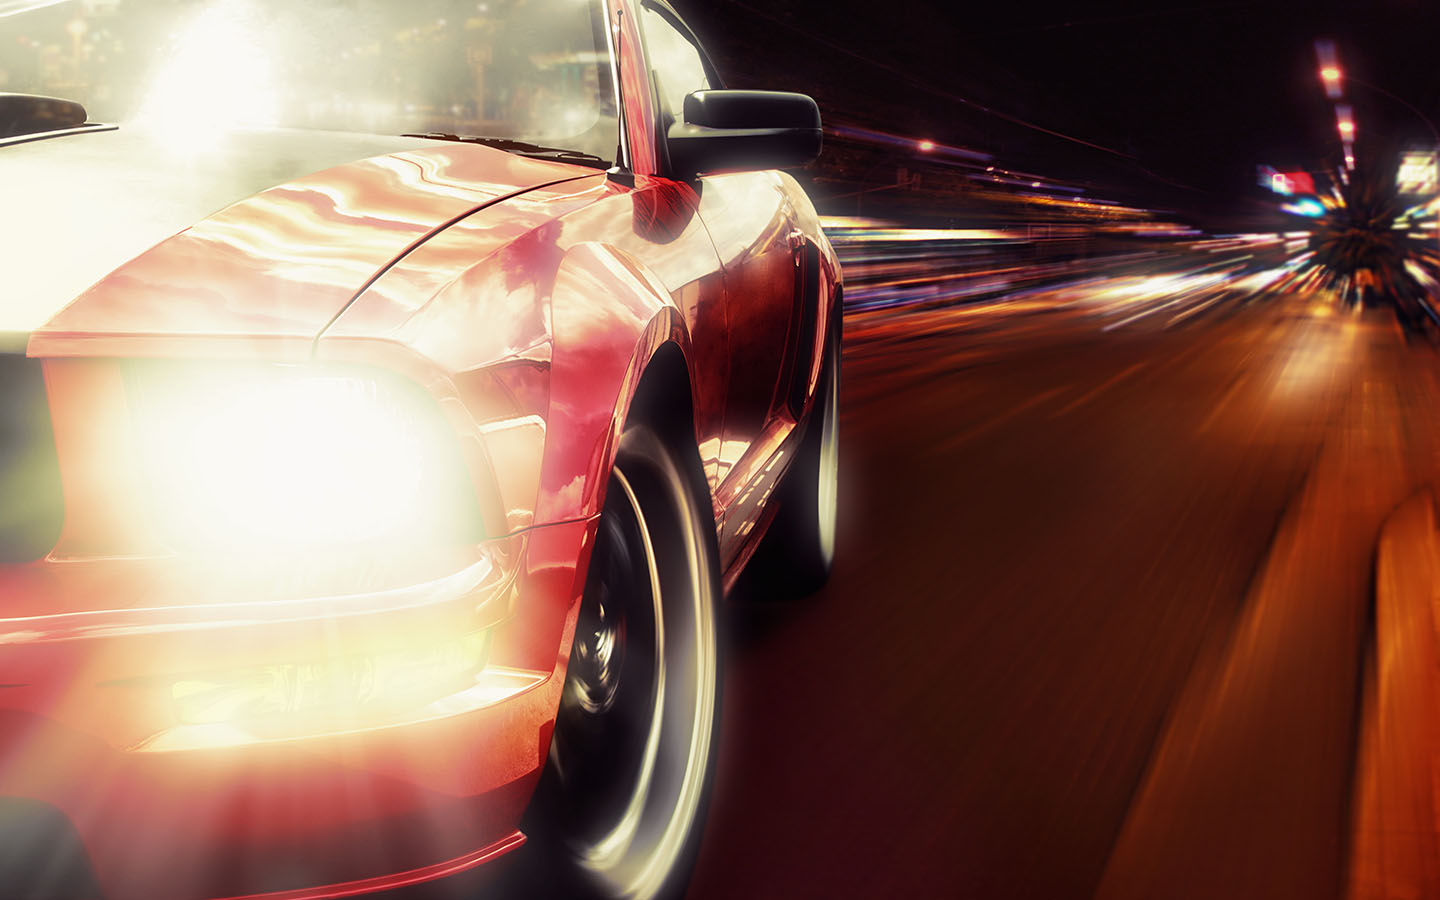 follow the ways to Improve Vehicle Aerodynamics and ensure an unmatched driving experience